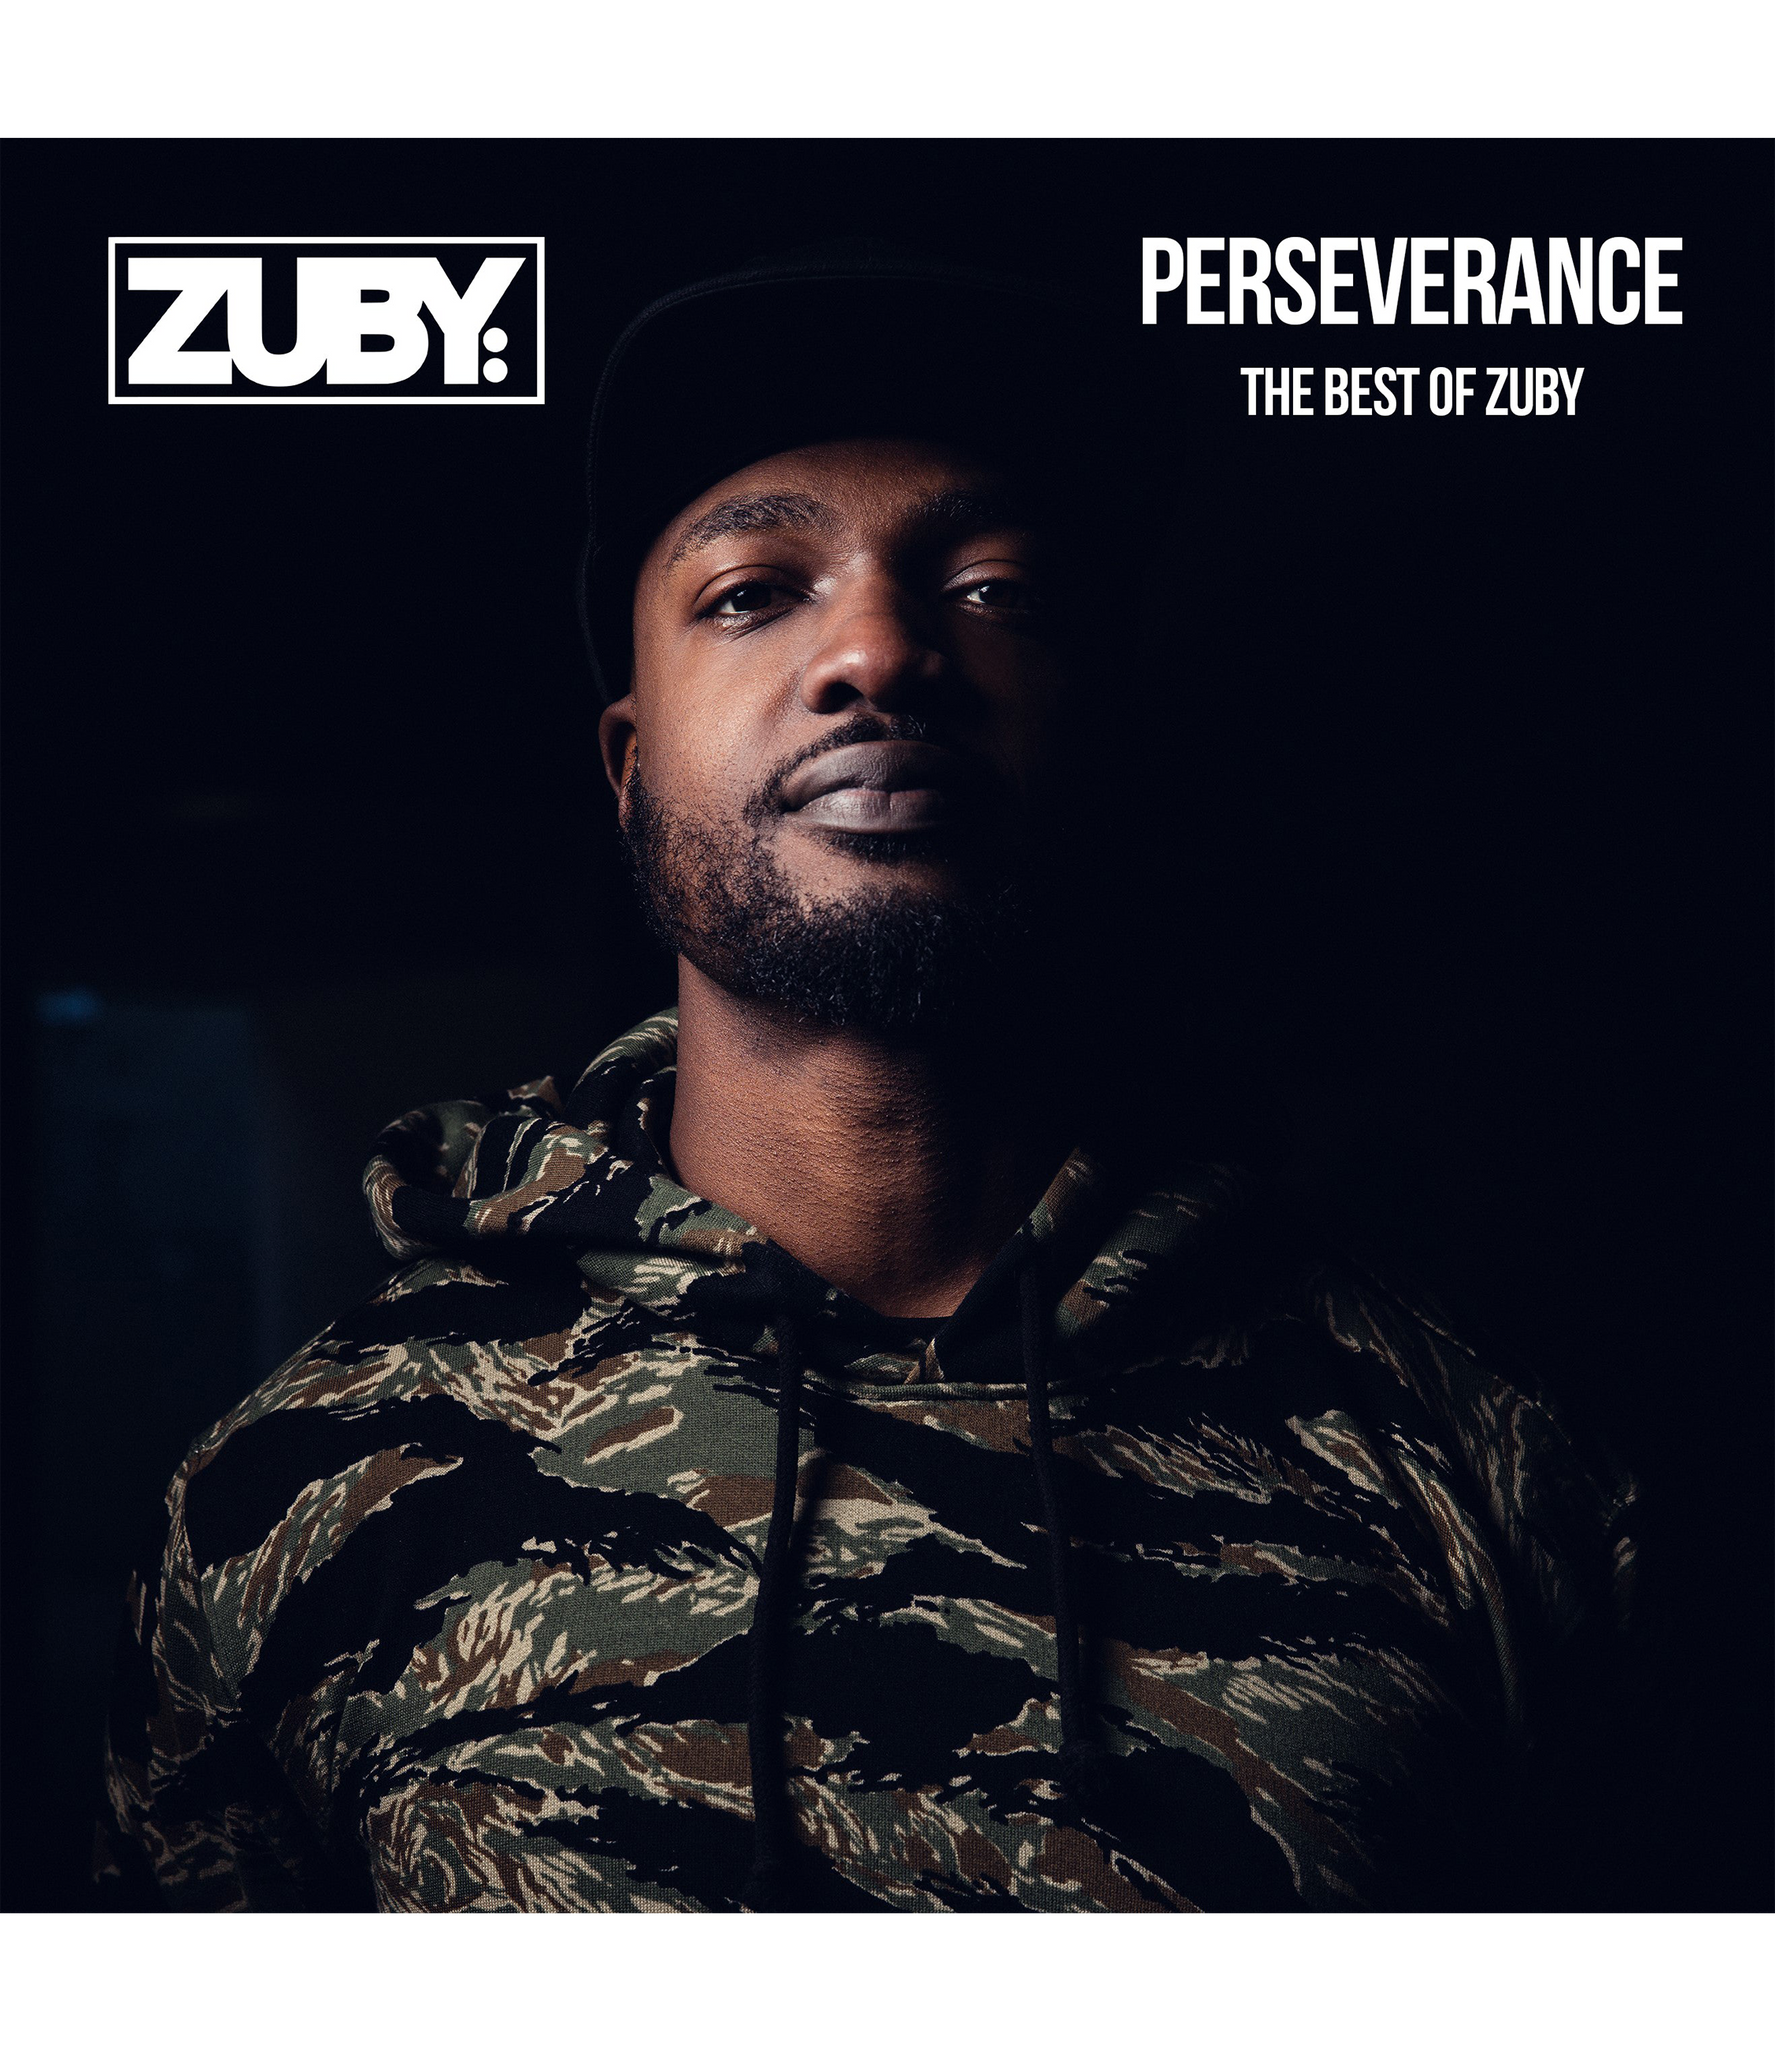 Perseverance: The Best of Zuby